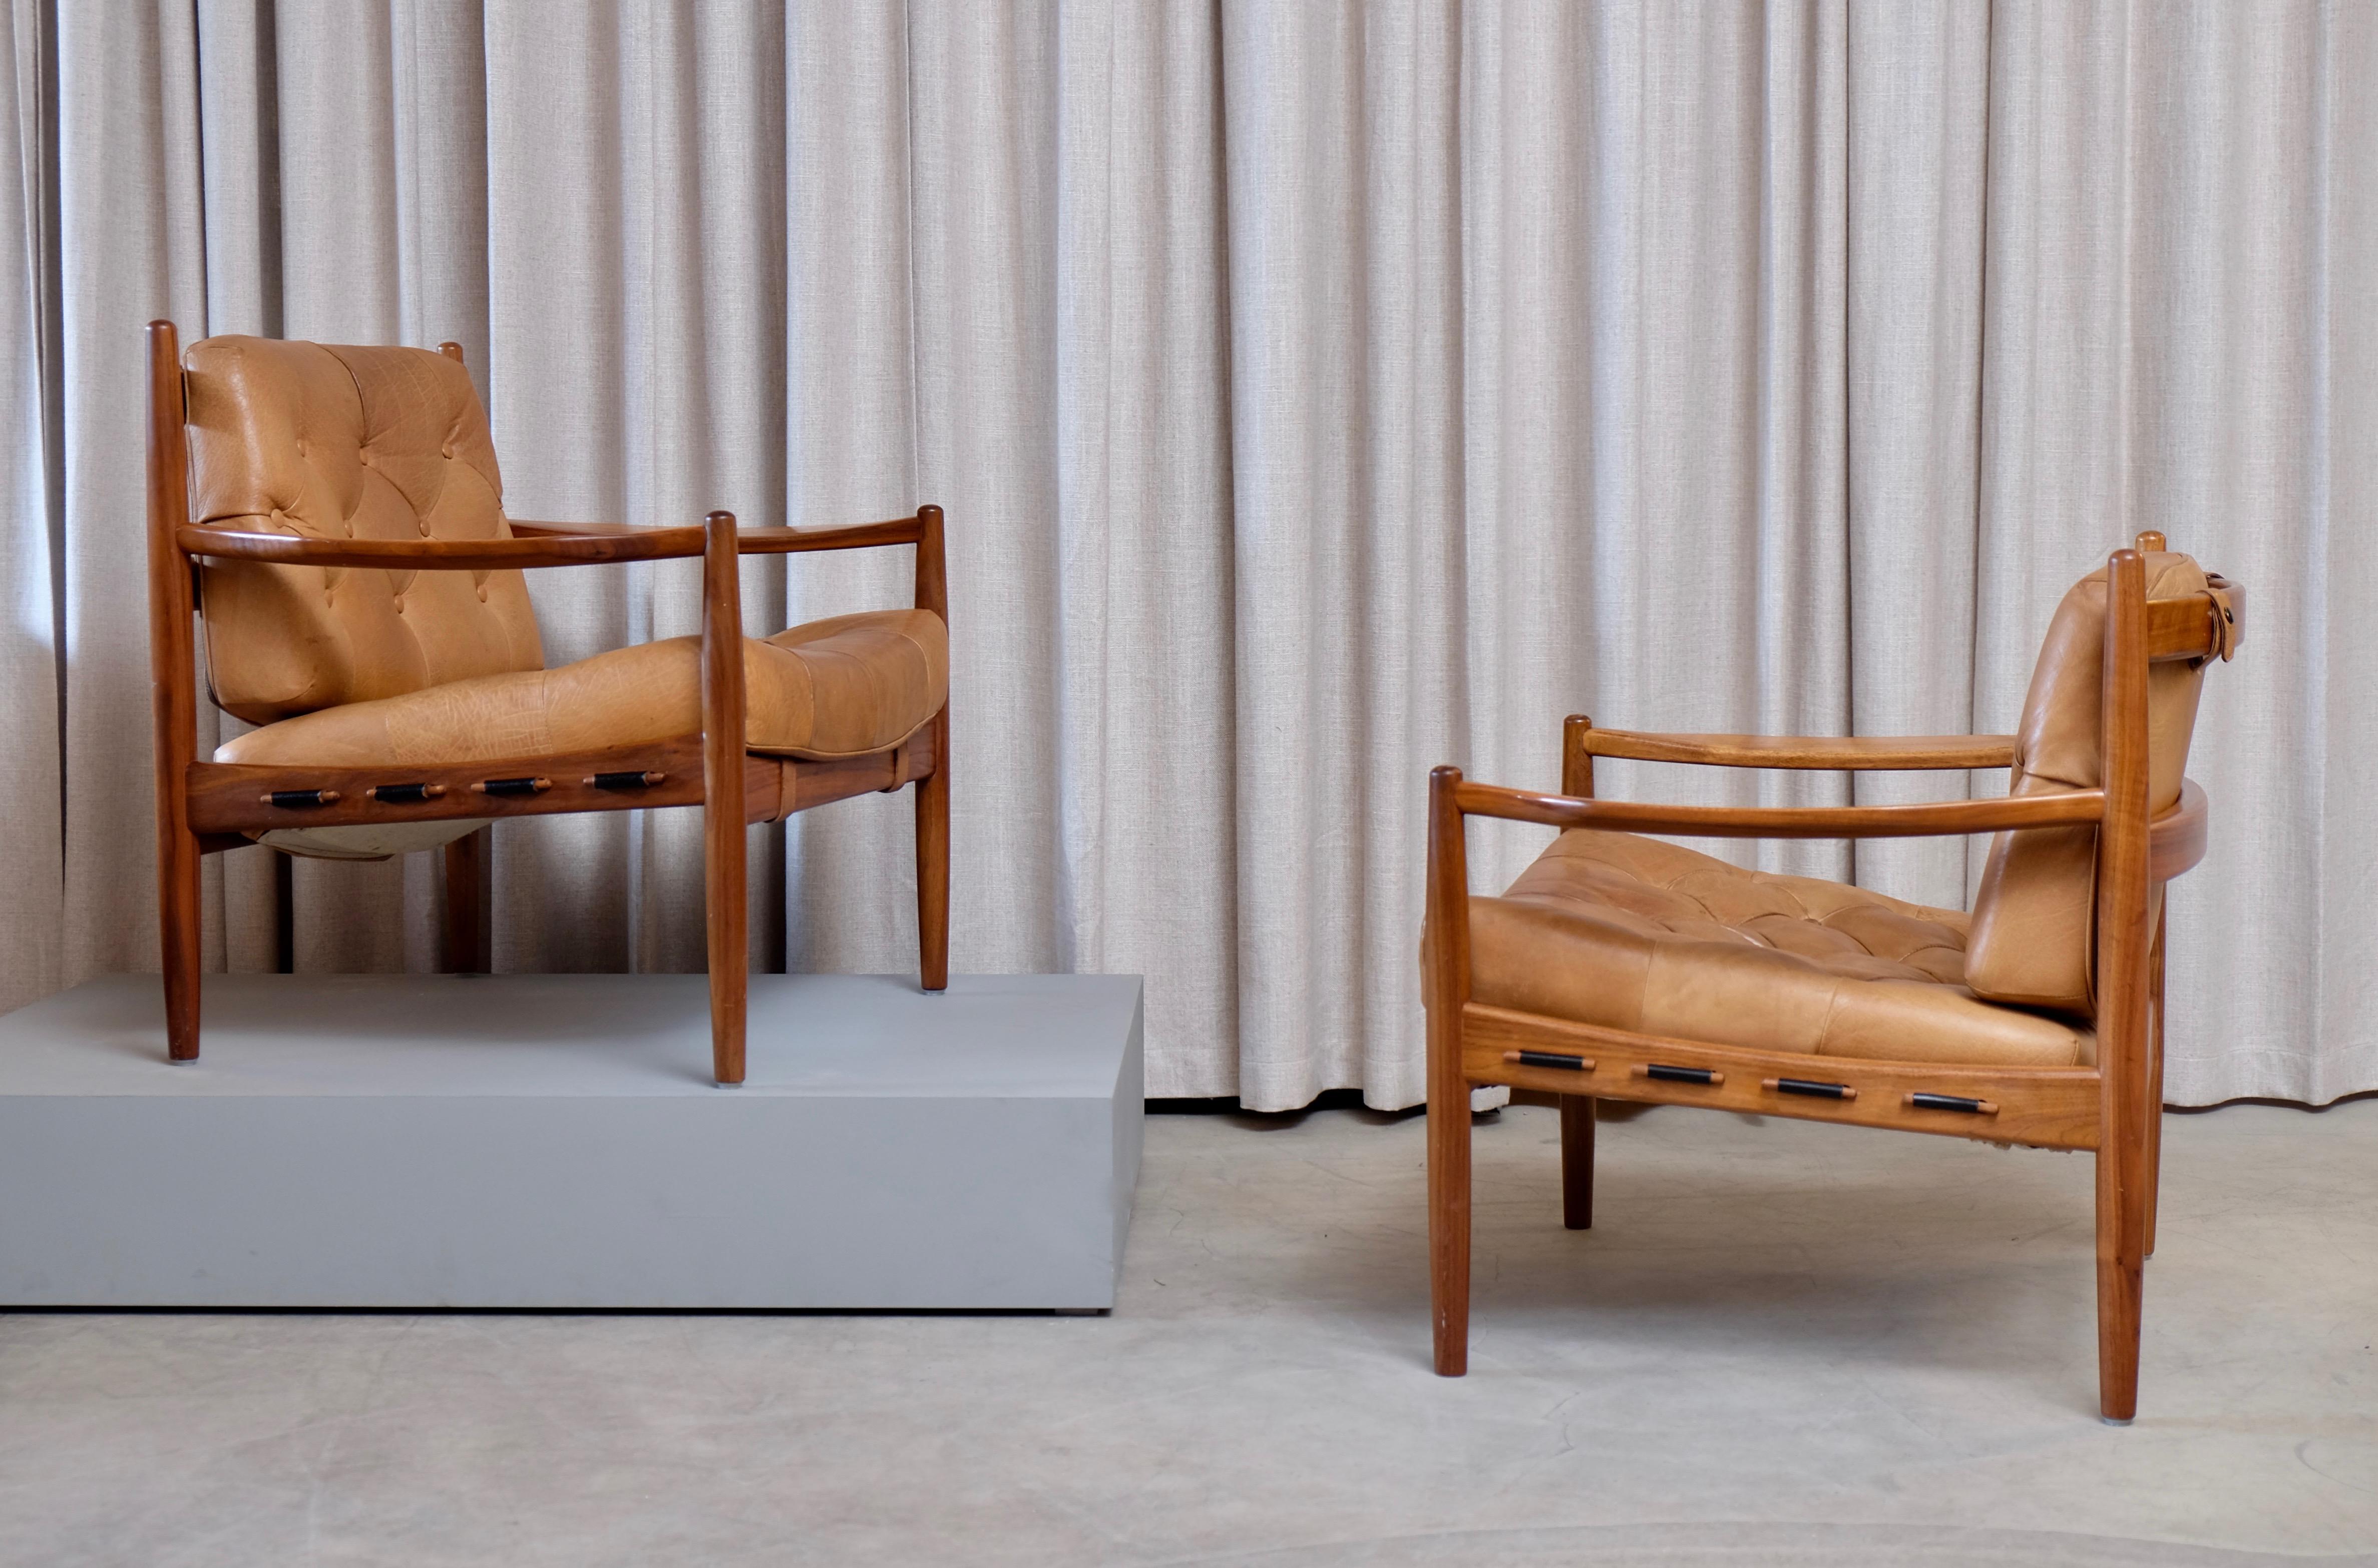 Pair of easy chair model Läckö designed by Ingemar Thillmark.
Original cognac brown leather.
Produced by OPE, Sweden, 1960s.
Good vintage condition, with signs of usage.
Global front door shipping, delivery within 7-14 days: €399.